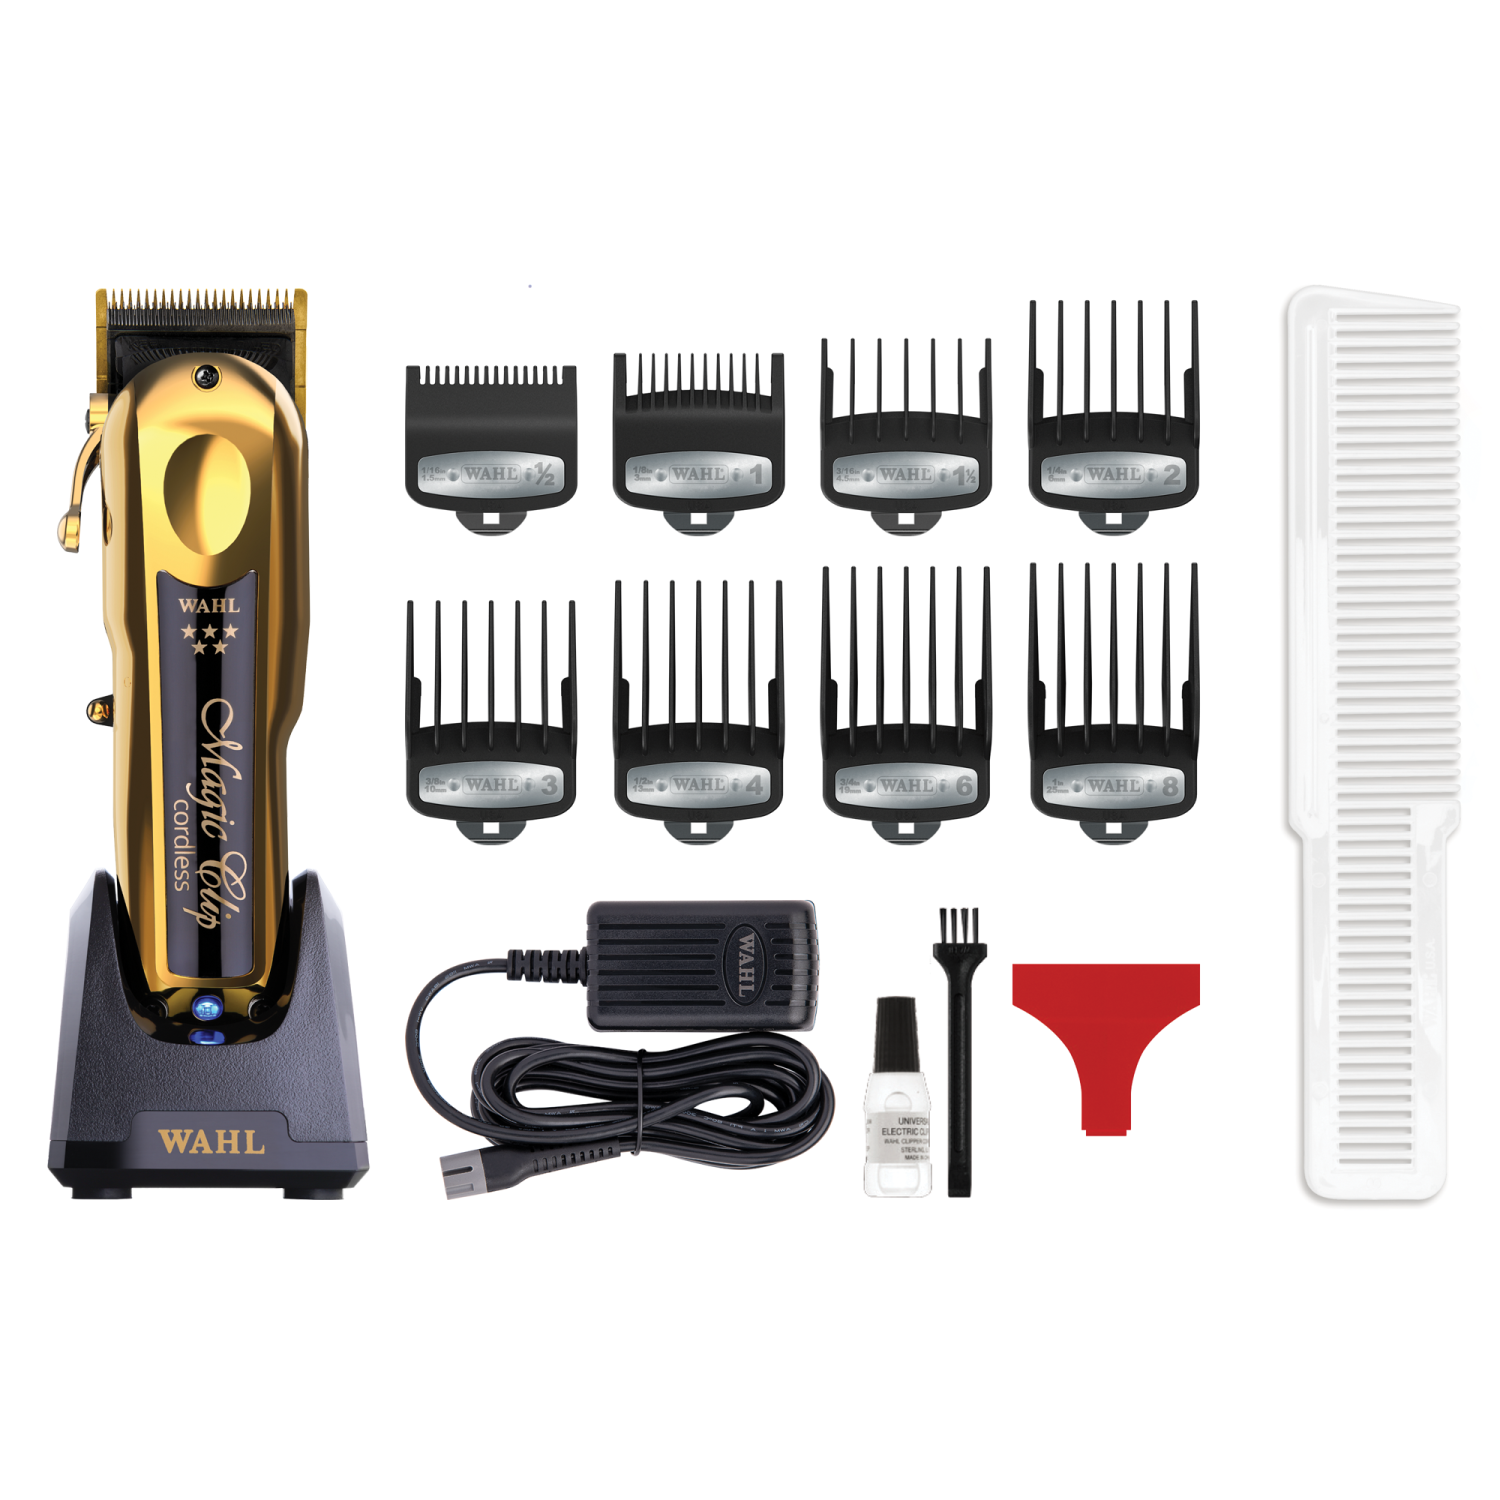 WAHL 5 Star Razor Magic Clip (with or without wires) | Best Buy Canada